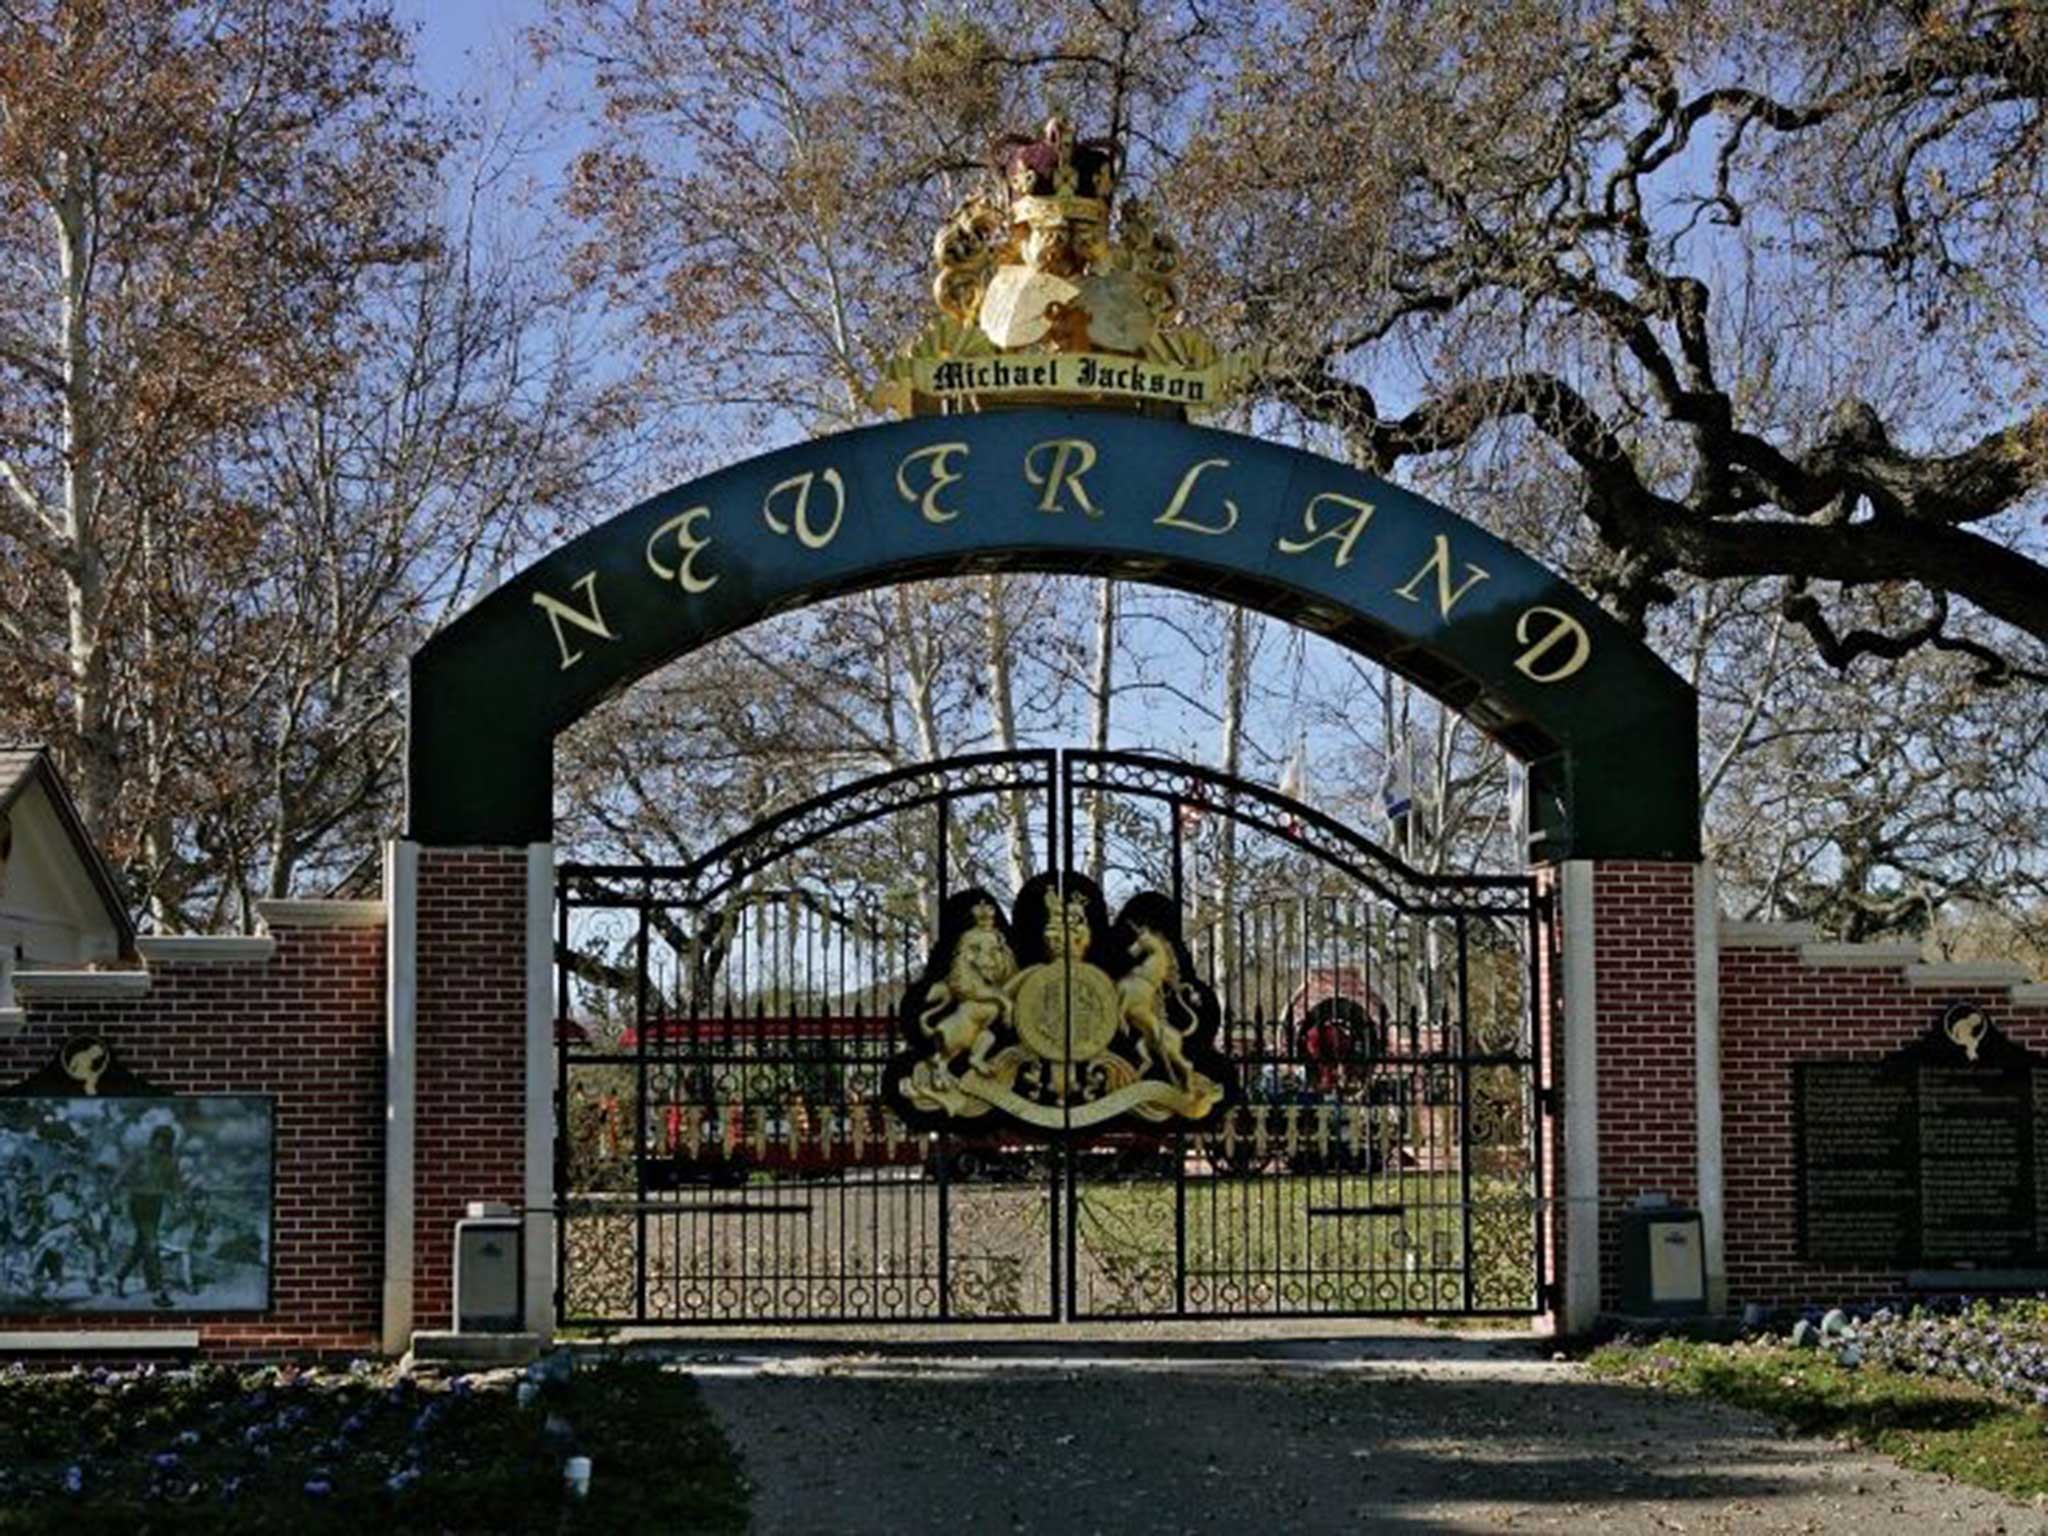 Neverland was carefully - and extensively - remodelled by the late singer